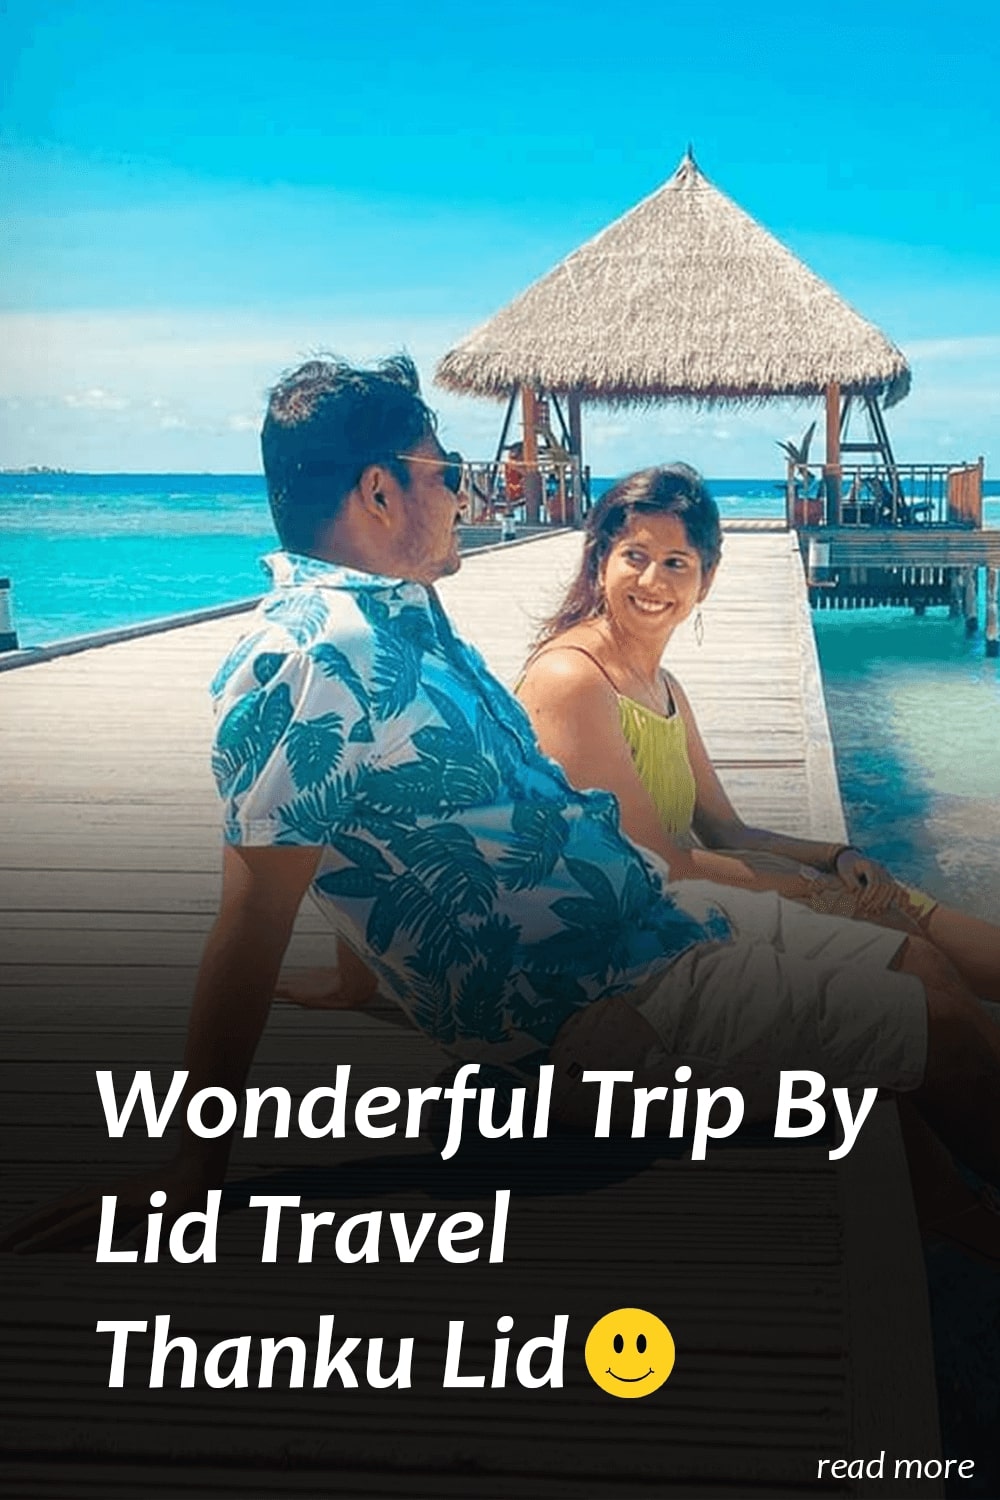 maldives honeymoon tour experience with lid travel